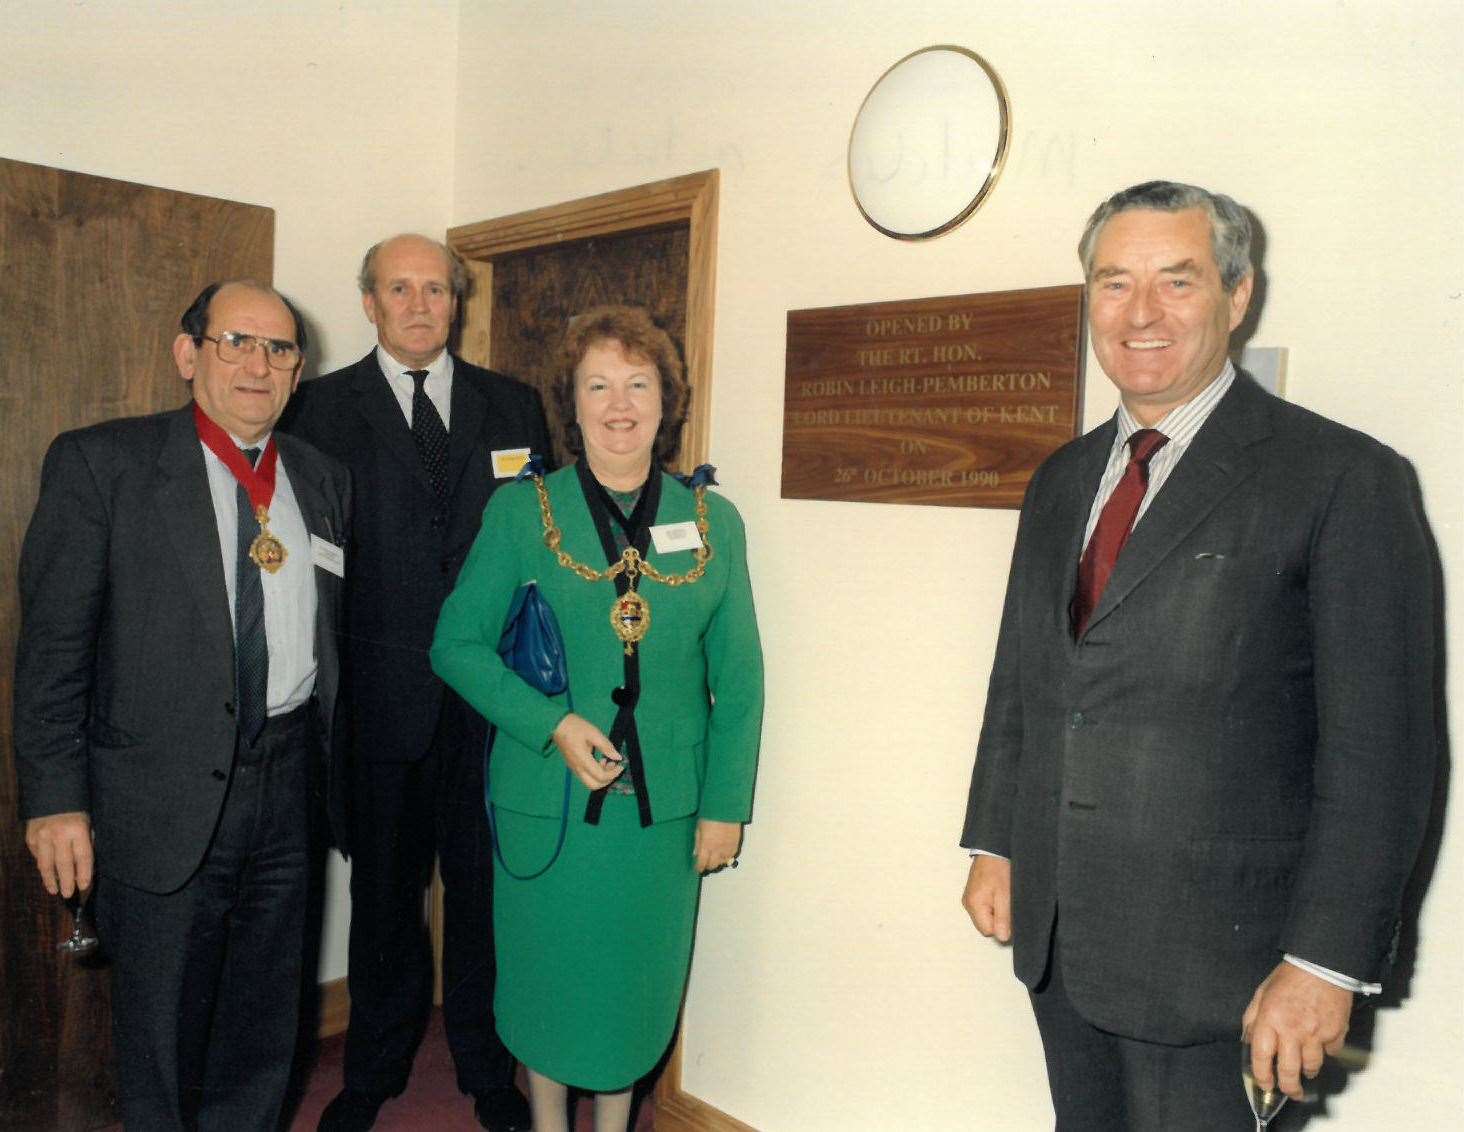 The opening of Somerfield House in 1990 with, from left, Sire John Grugeon, chairman of KCC; George Bracher, the Mayor of Maidstone Cllr Mary Black and the Lord Lieutenant of Kent Robin Leigh-Pemberton